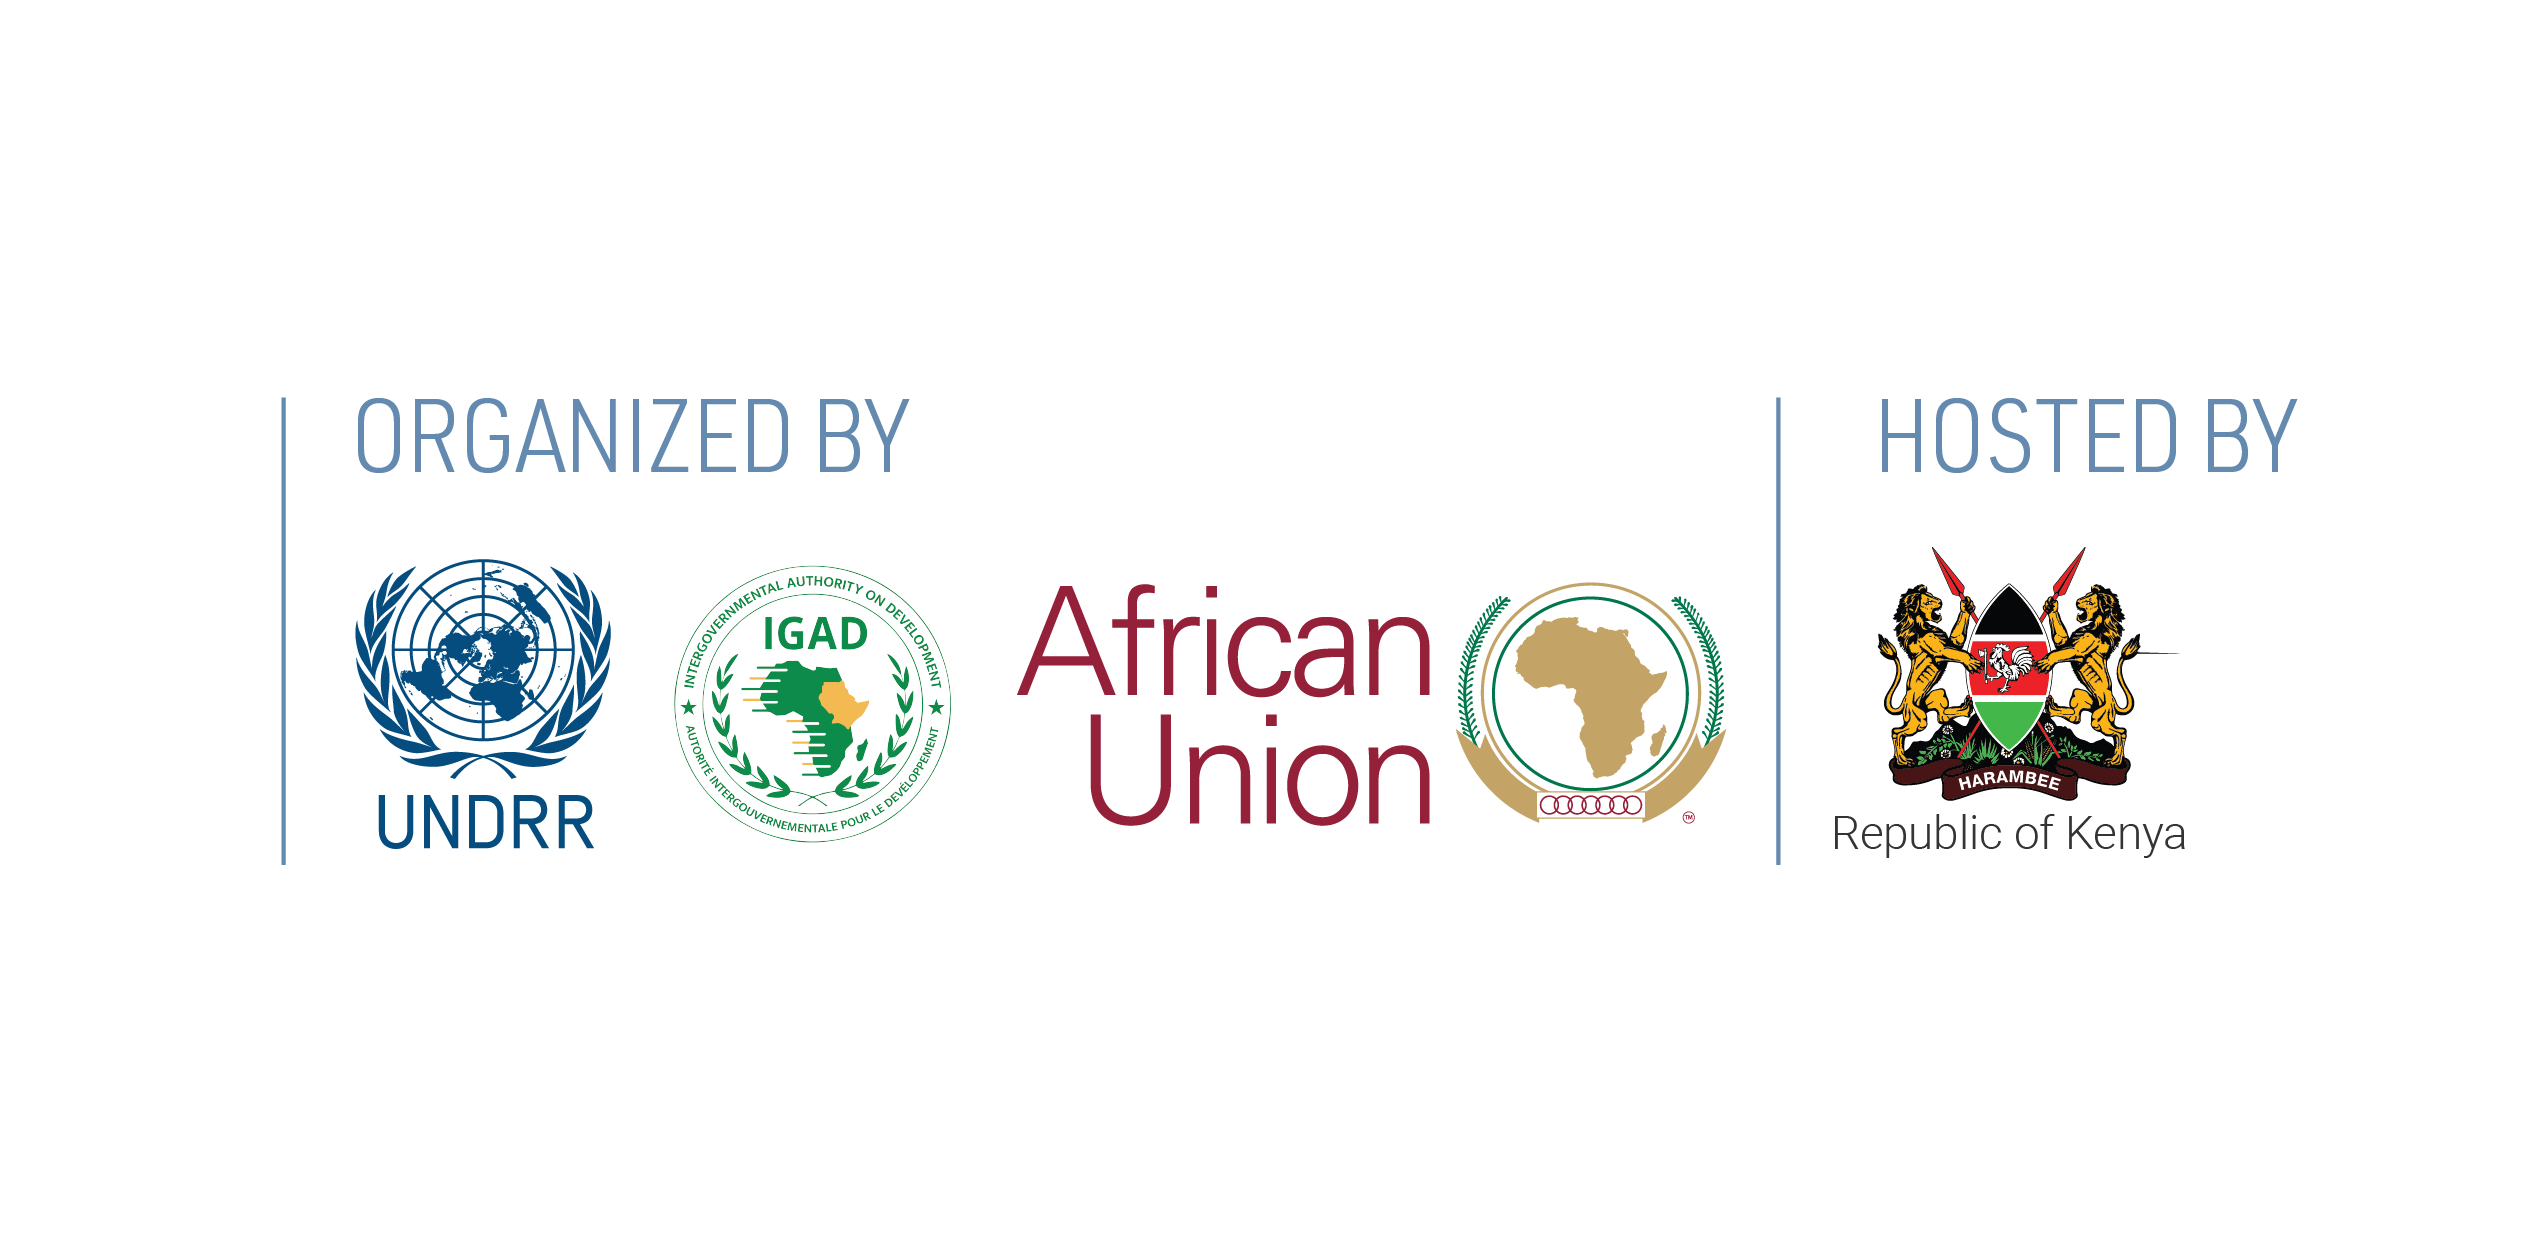 logos of the organizers (UNDRR, IGAD, AU) and the host country (Republic of Kenya)